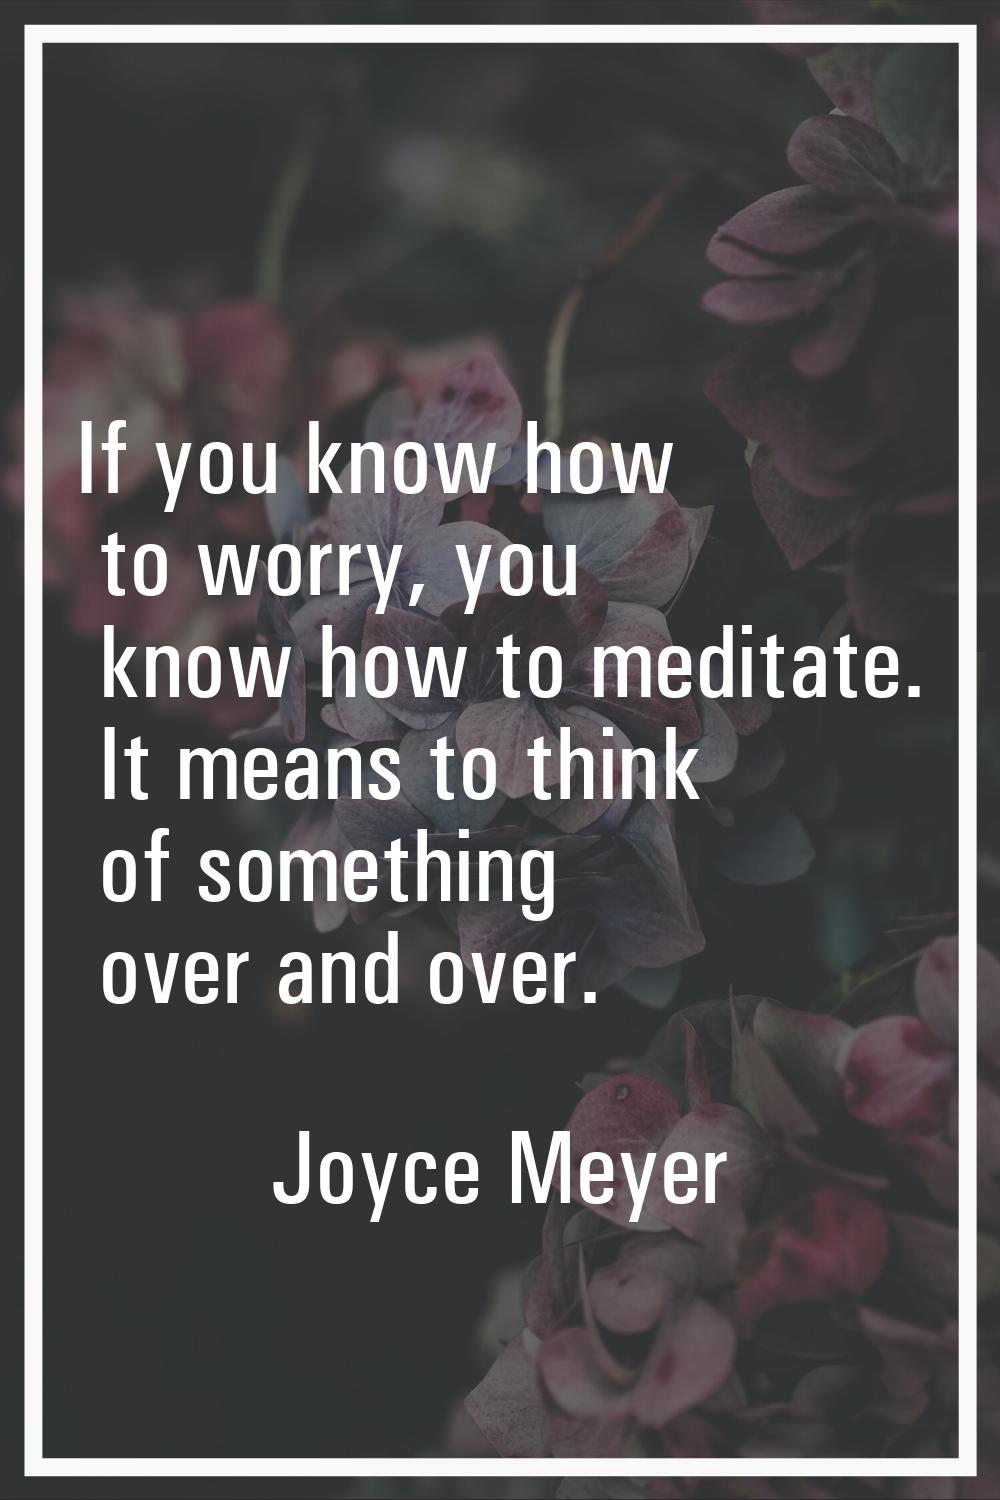 If you know how to worry, you know how to meditate. It means to think of something over and over.